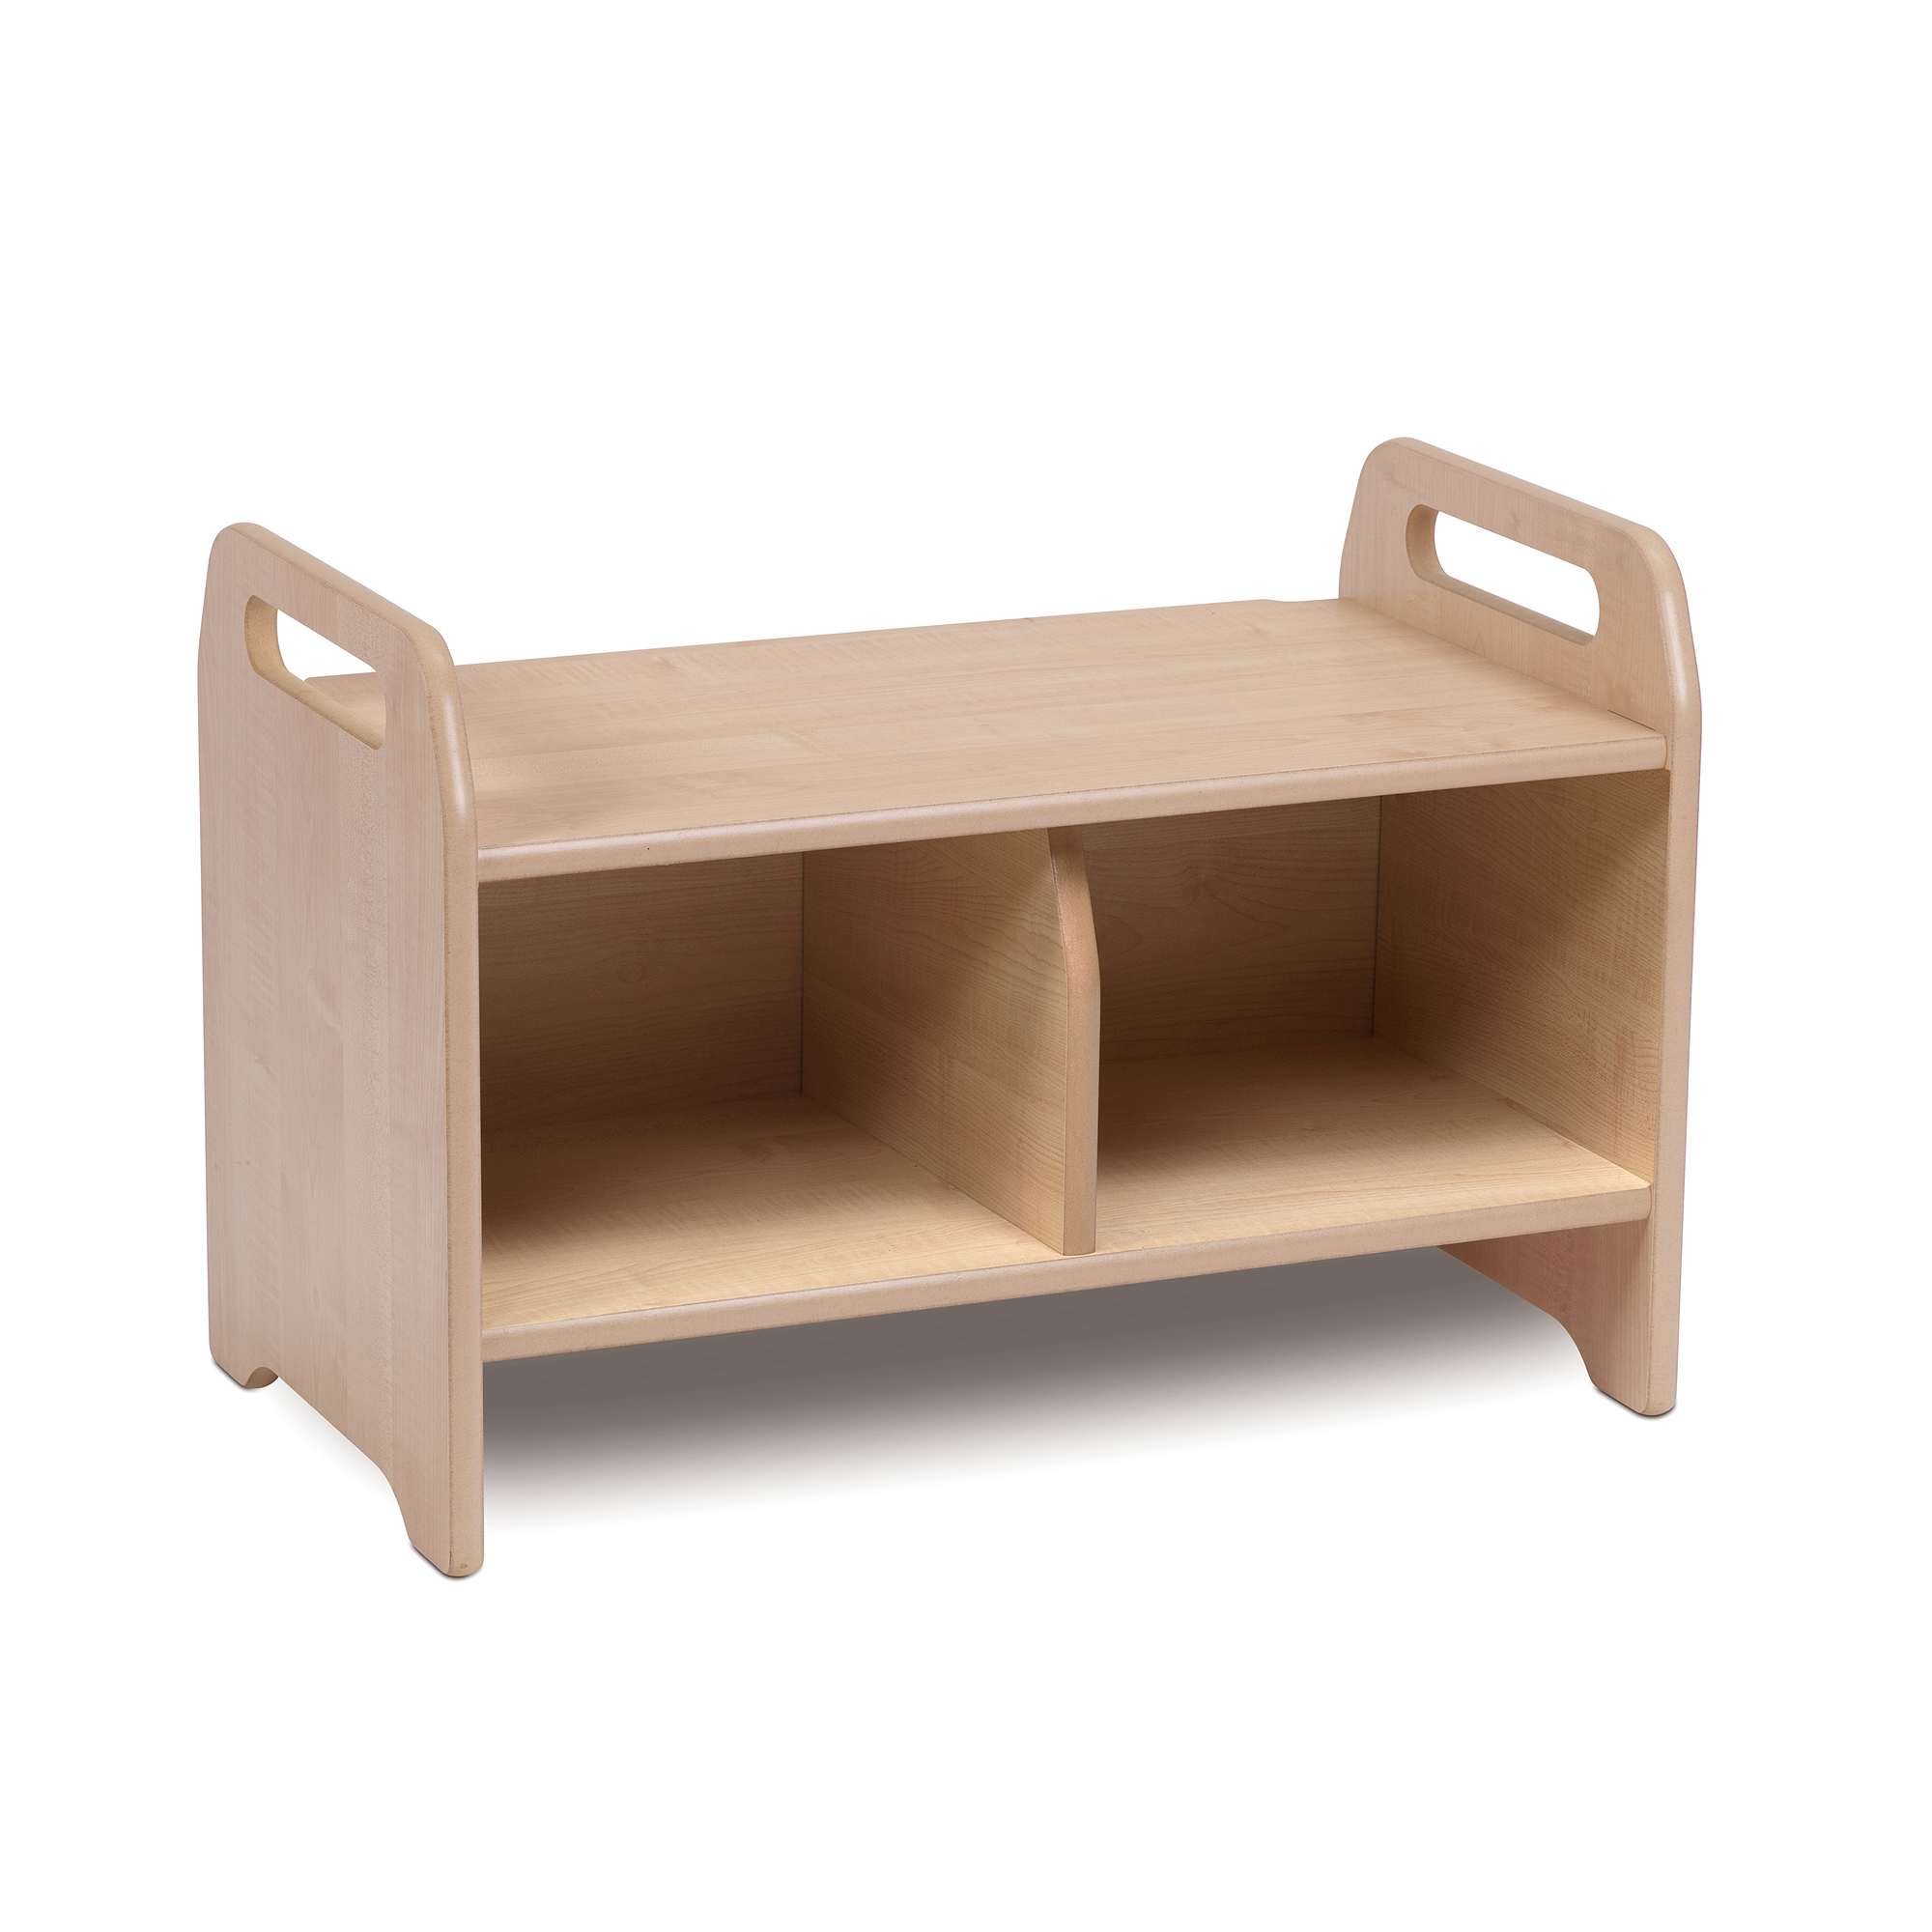 Welcome Storage Bench - Small